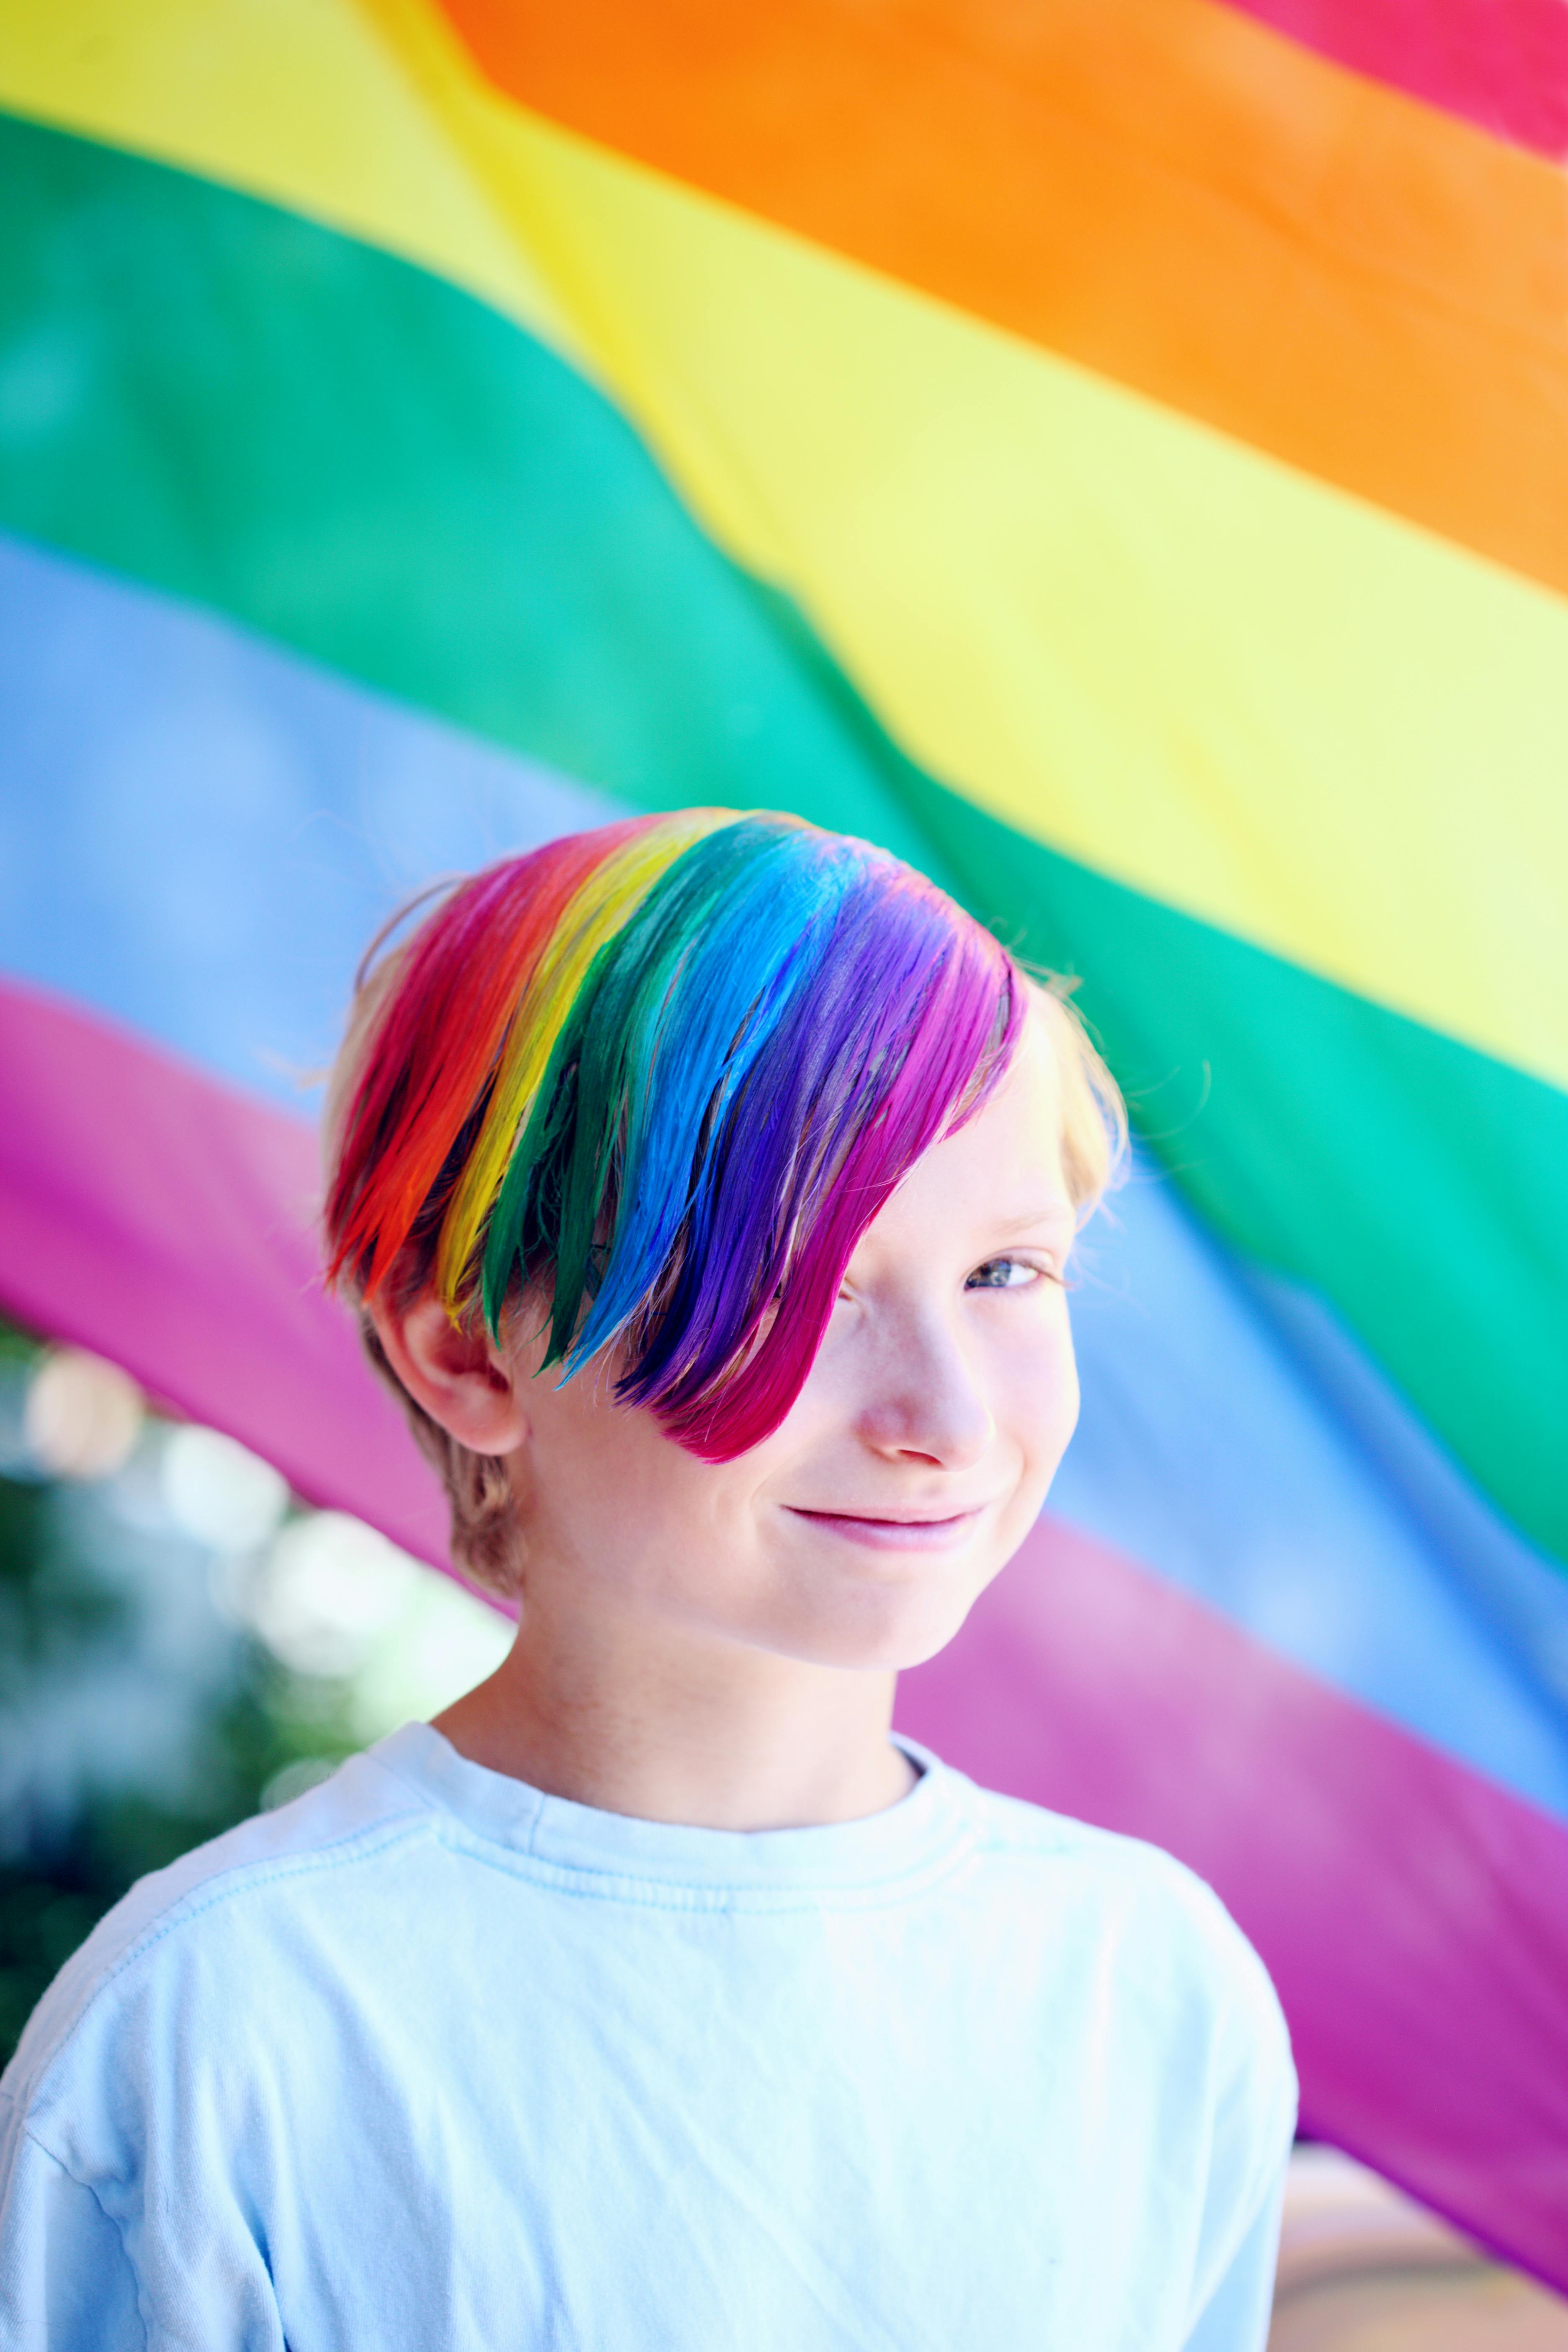 Boy Wearing White Shirt With Iridescent Hair Color Infront of Flag · Free  Stock Photo